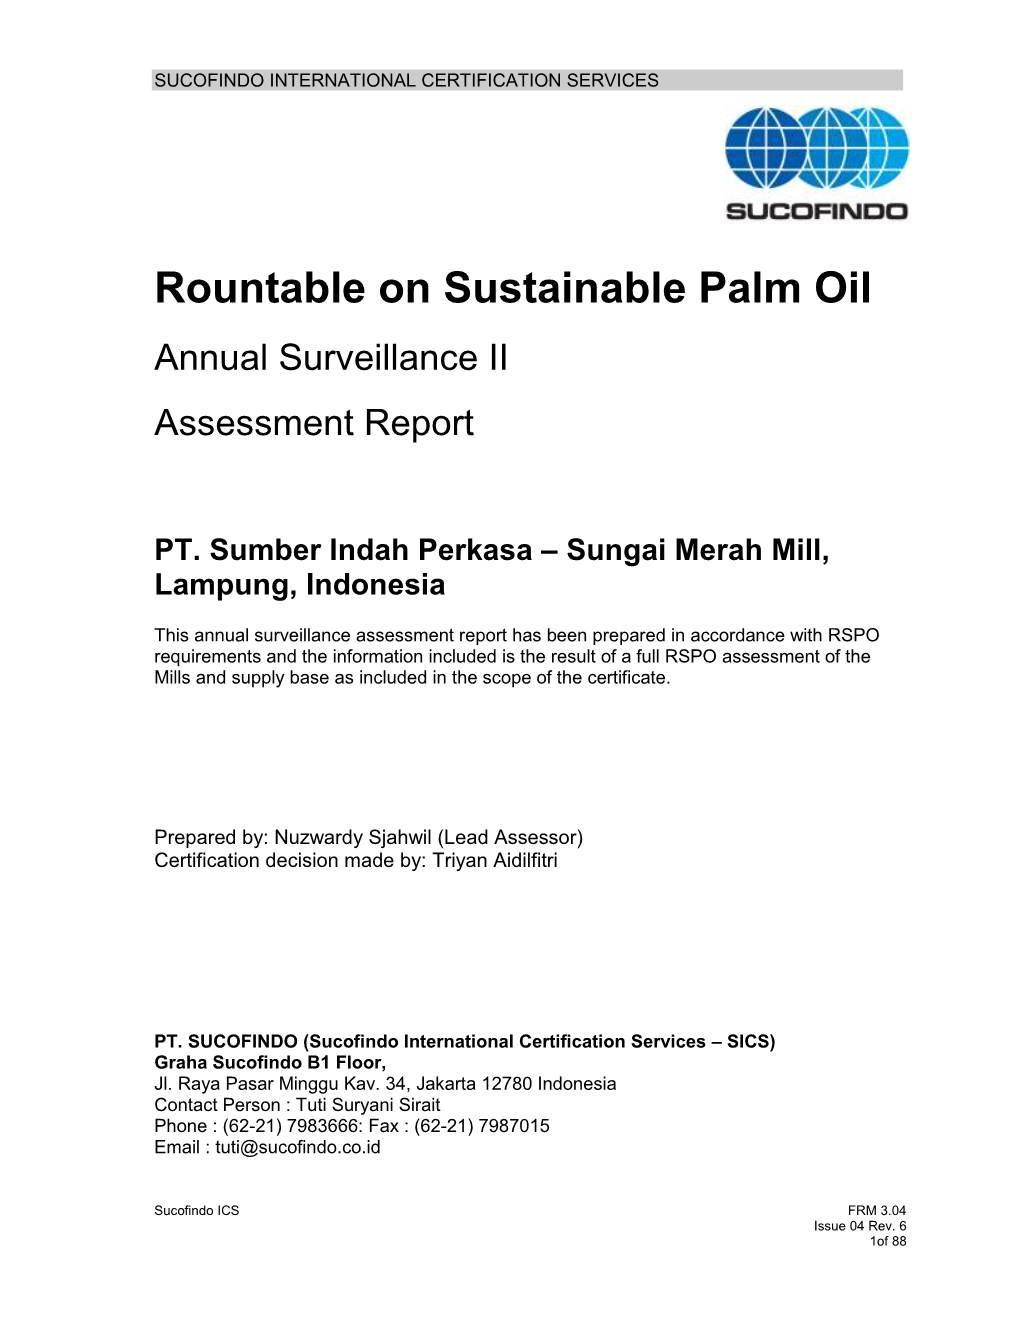 Rountable on Sustainable Palm Oil Annual Surveillance II Assessment Report